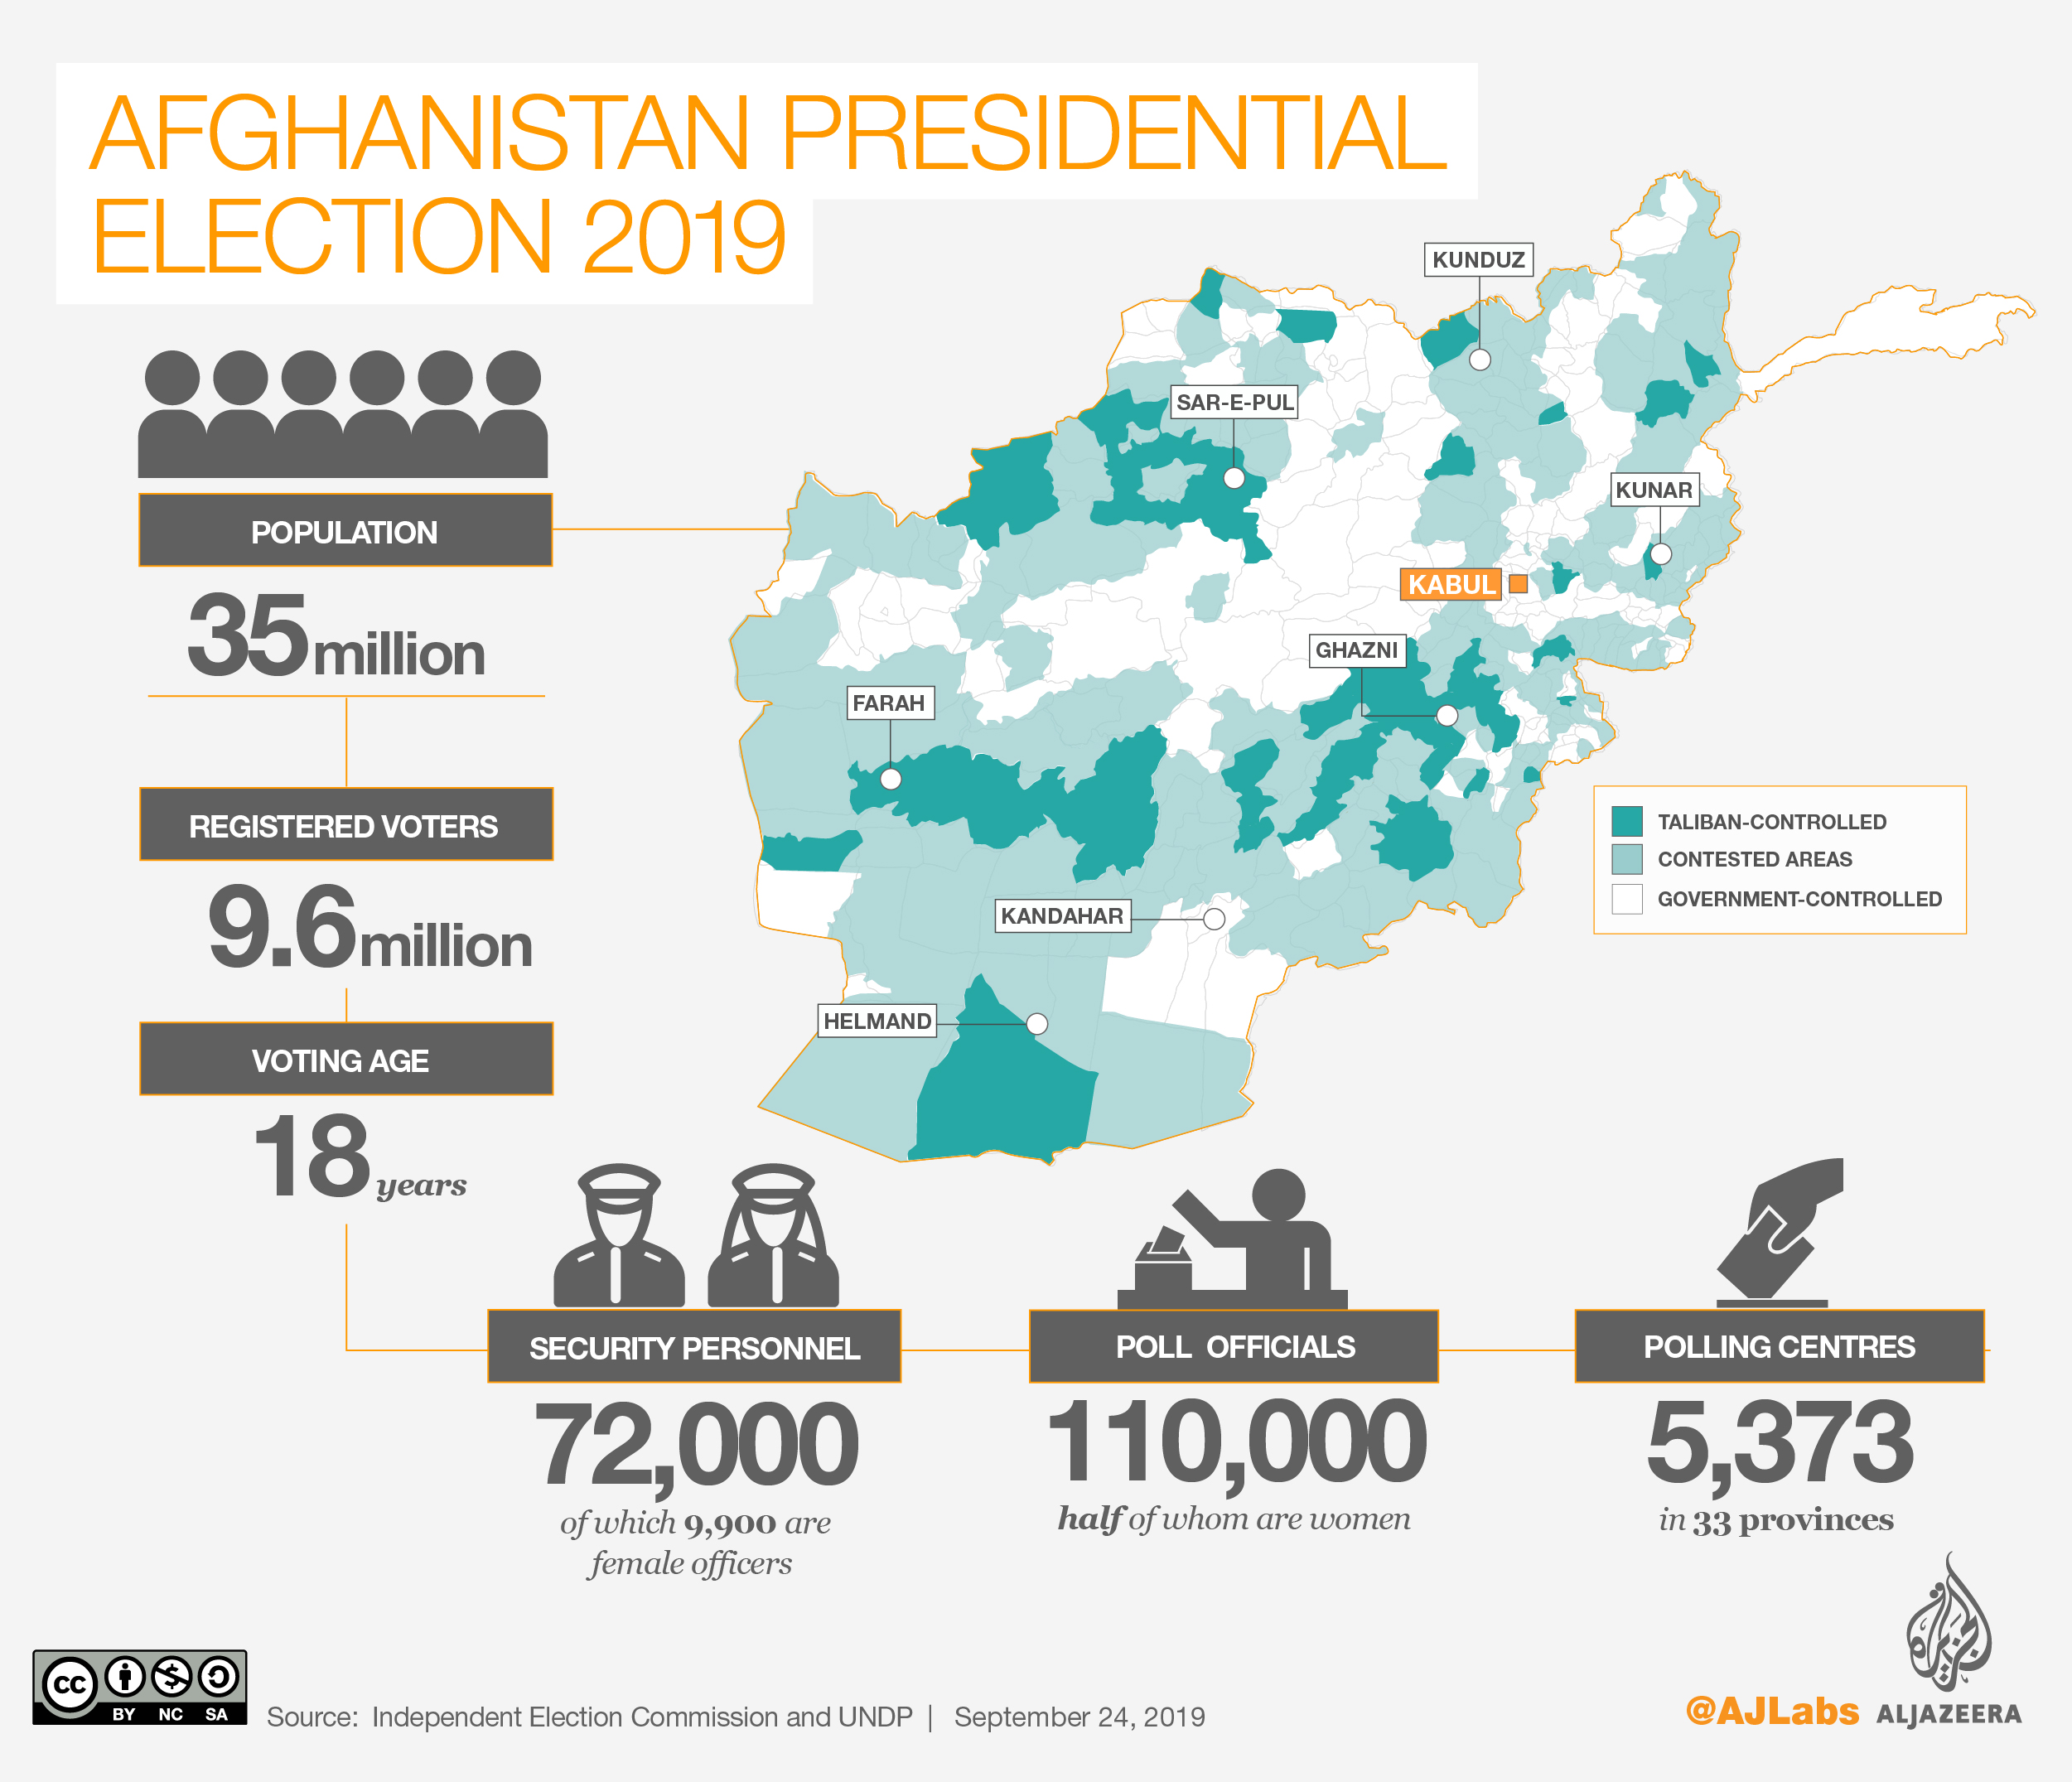 INTERACTIVE: AFGHANISTAN ELECTION 2018 